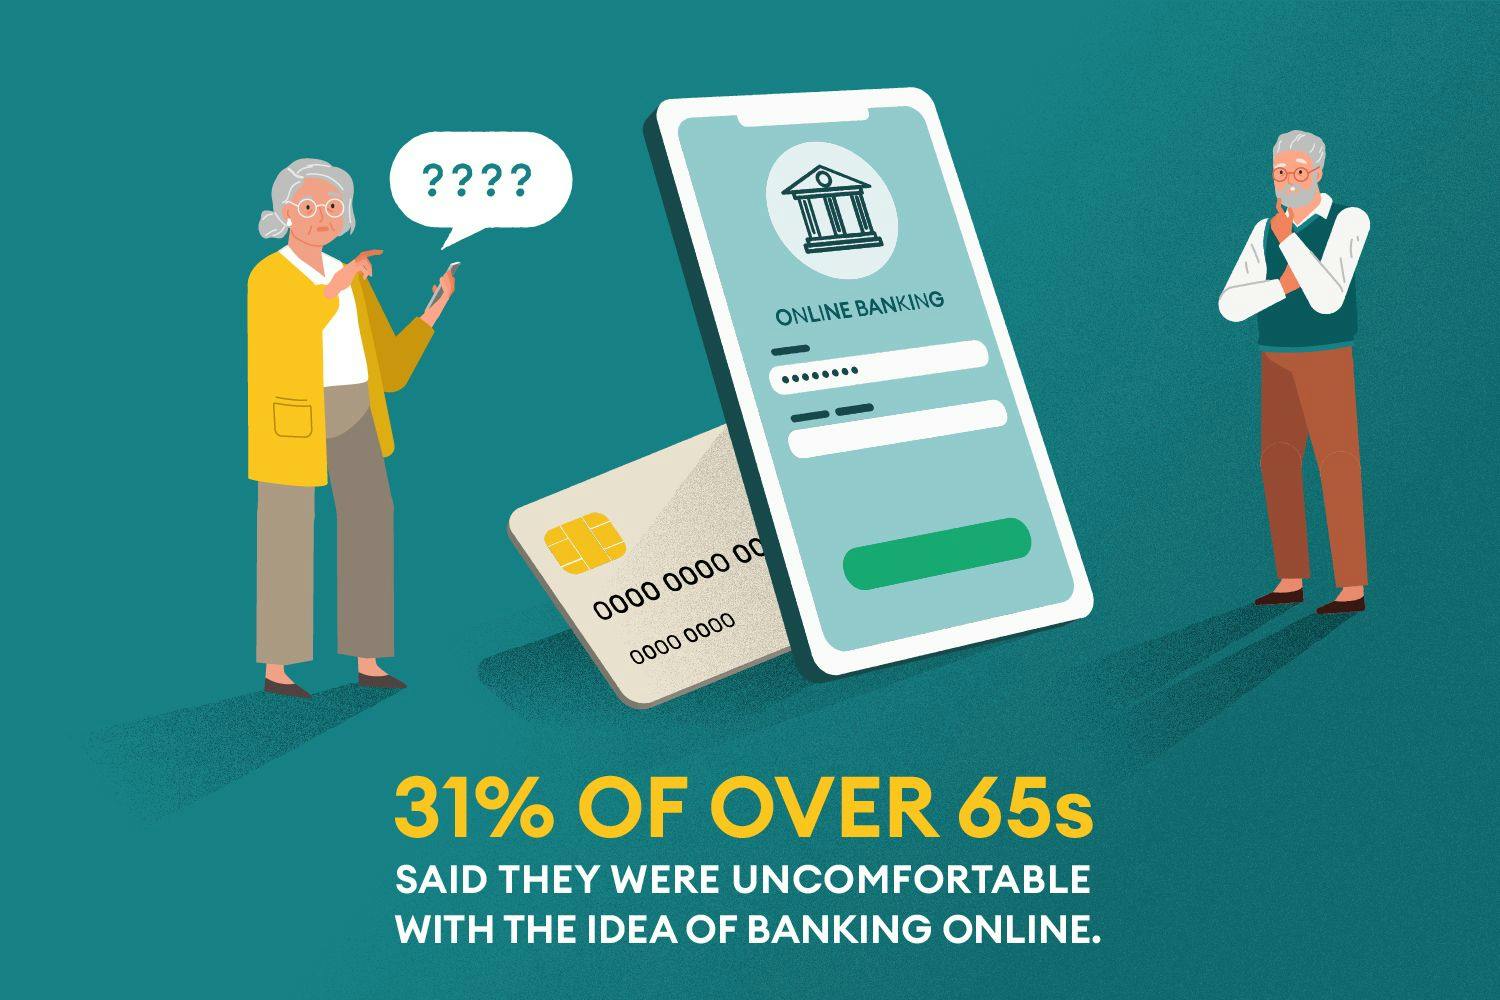 illustration of older man and woman next to a large phone and credit card. Text reads: 31% of over 65s said they were uncomfortable with the idea of banking online.